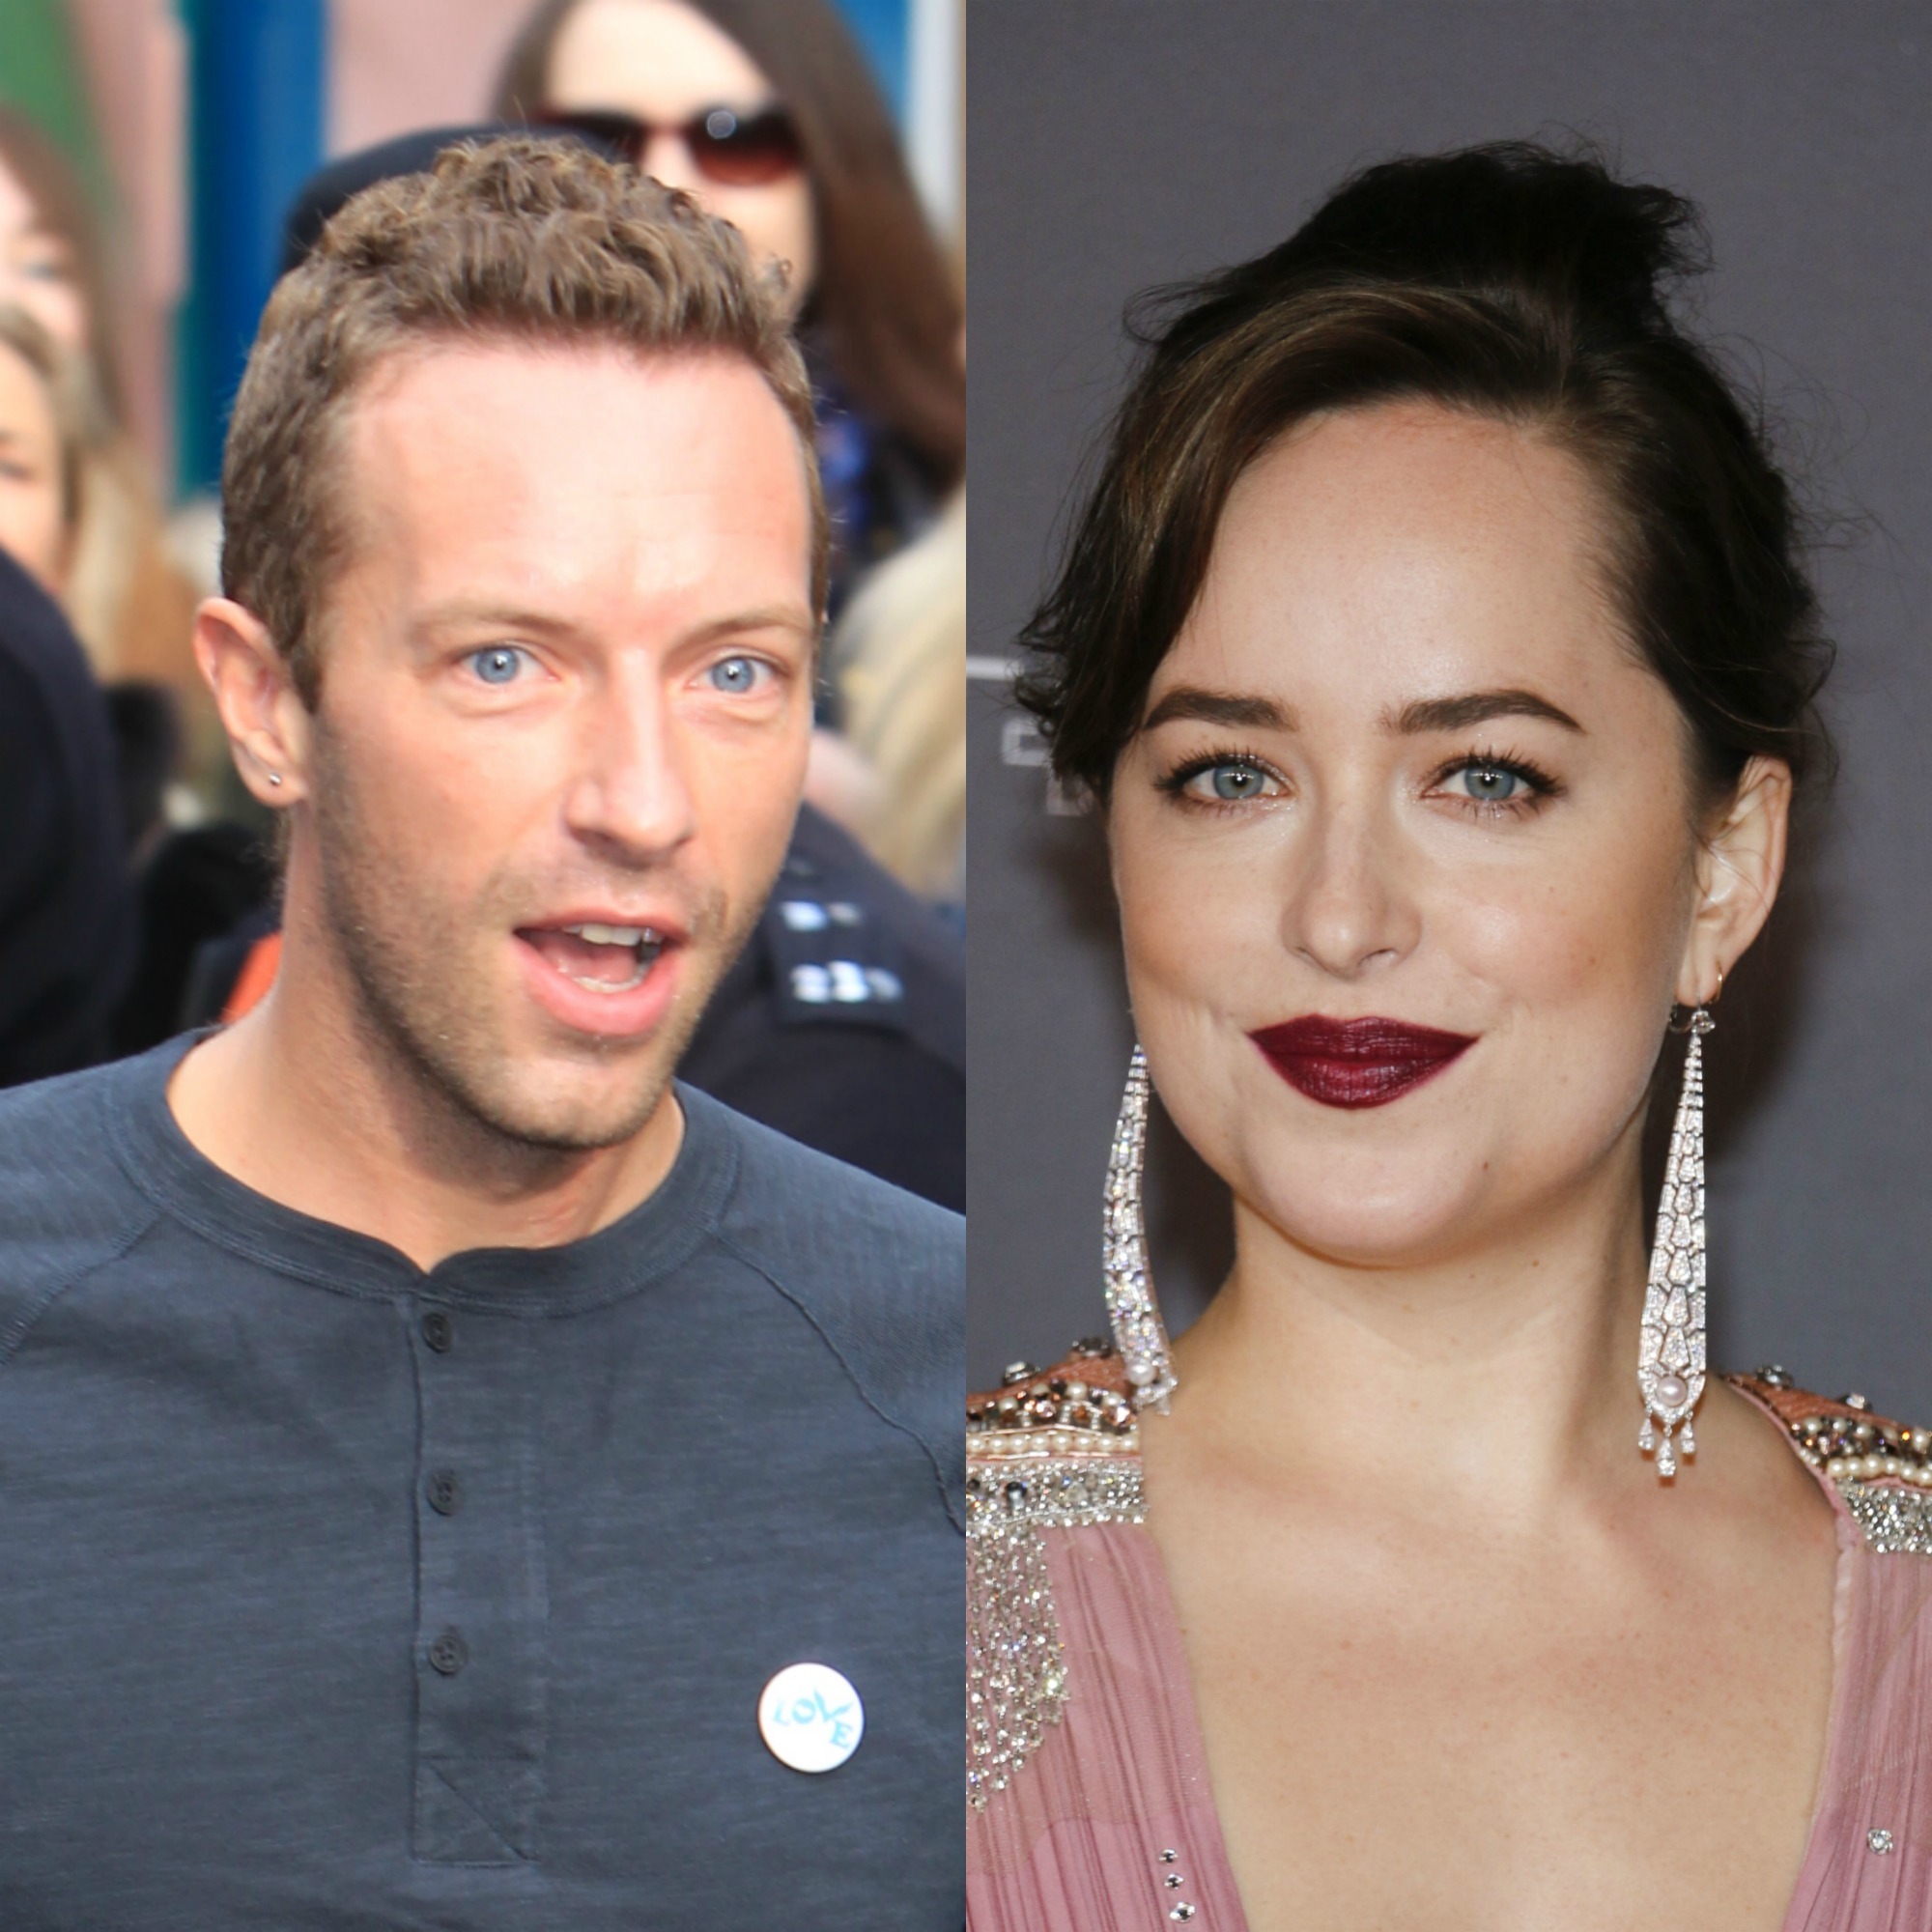 Chris Martin and Dakota Johnson ‘engaged’ after 6 years together | Goss.ie